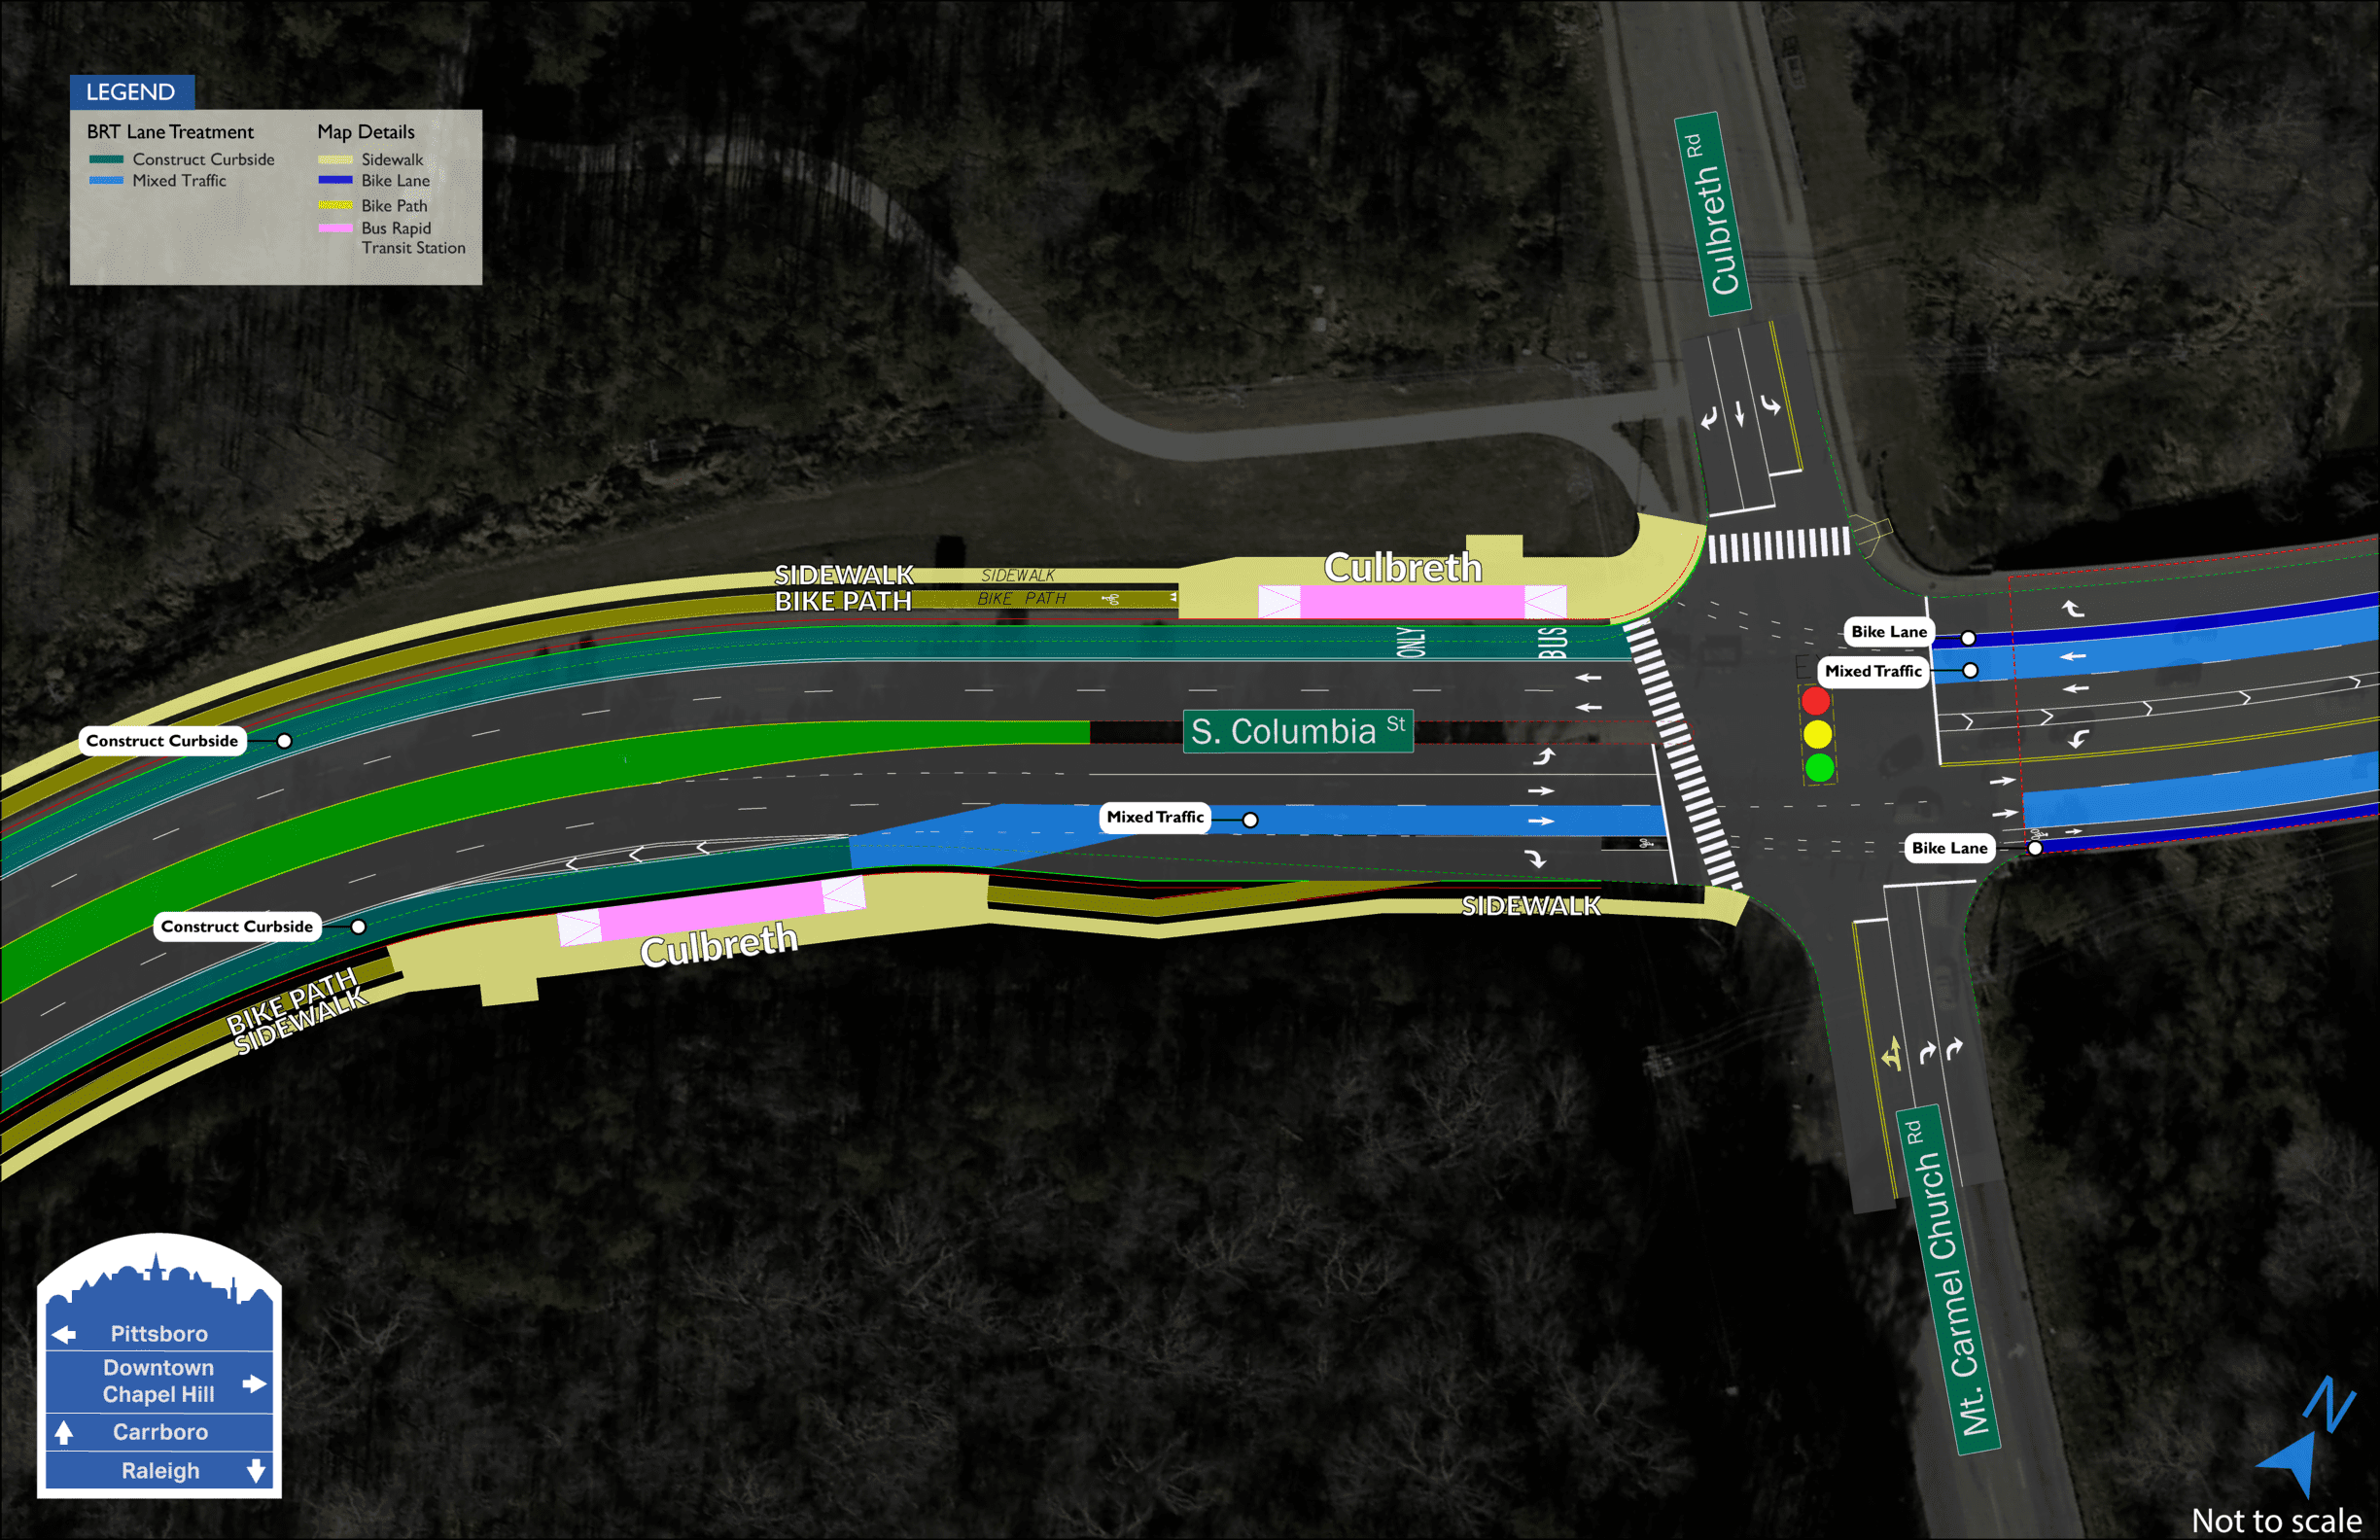 Culbreth BRT map showing two stations on S. Columbia Street next to Culbreth Road.